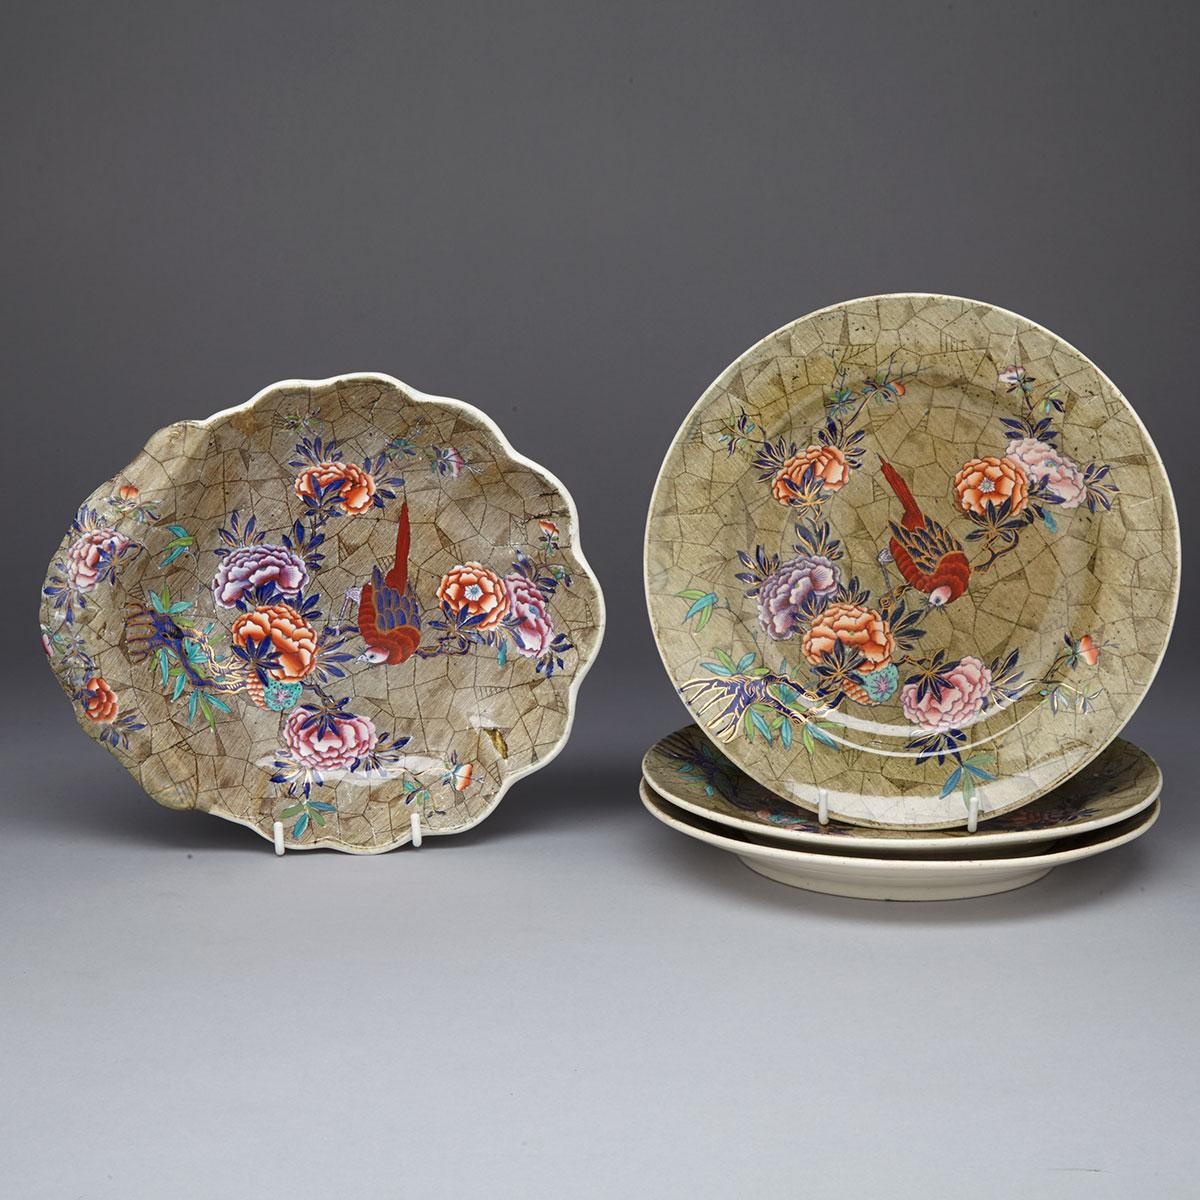 Three Spode Pearlware ‘Tumbledown Jack’ Pattern Plates and a Shell Dish, c.1820